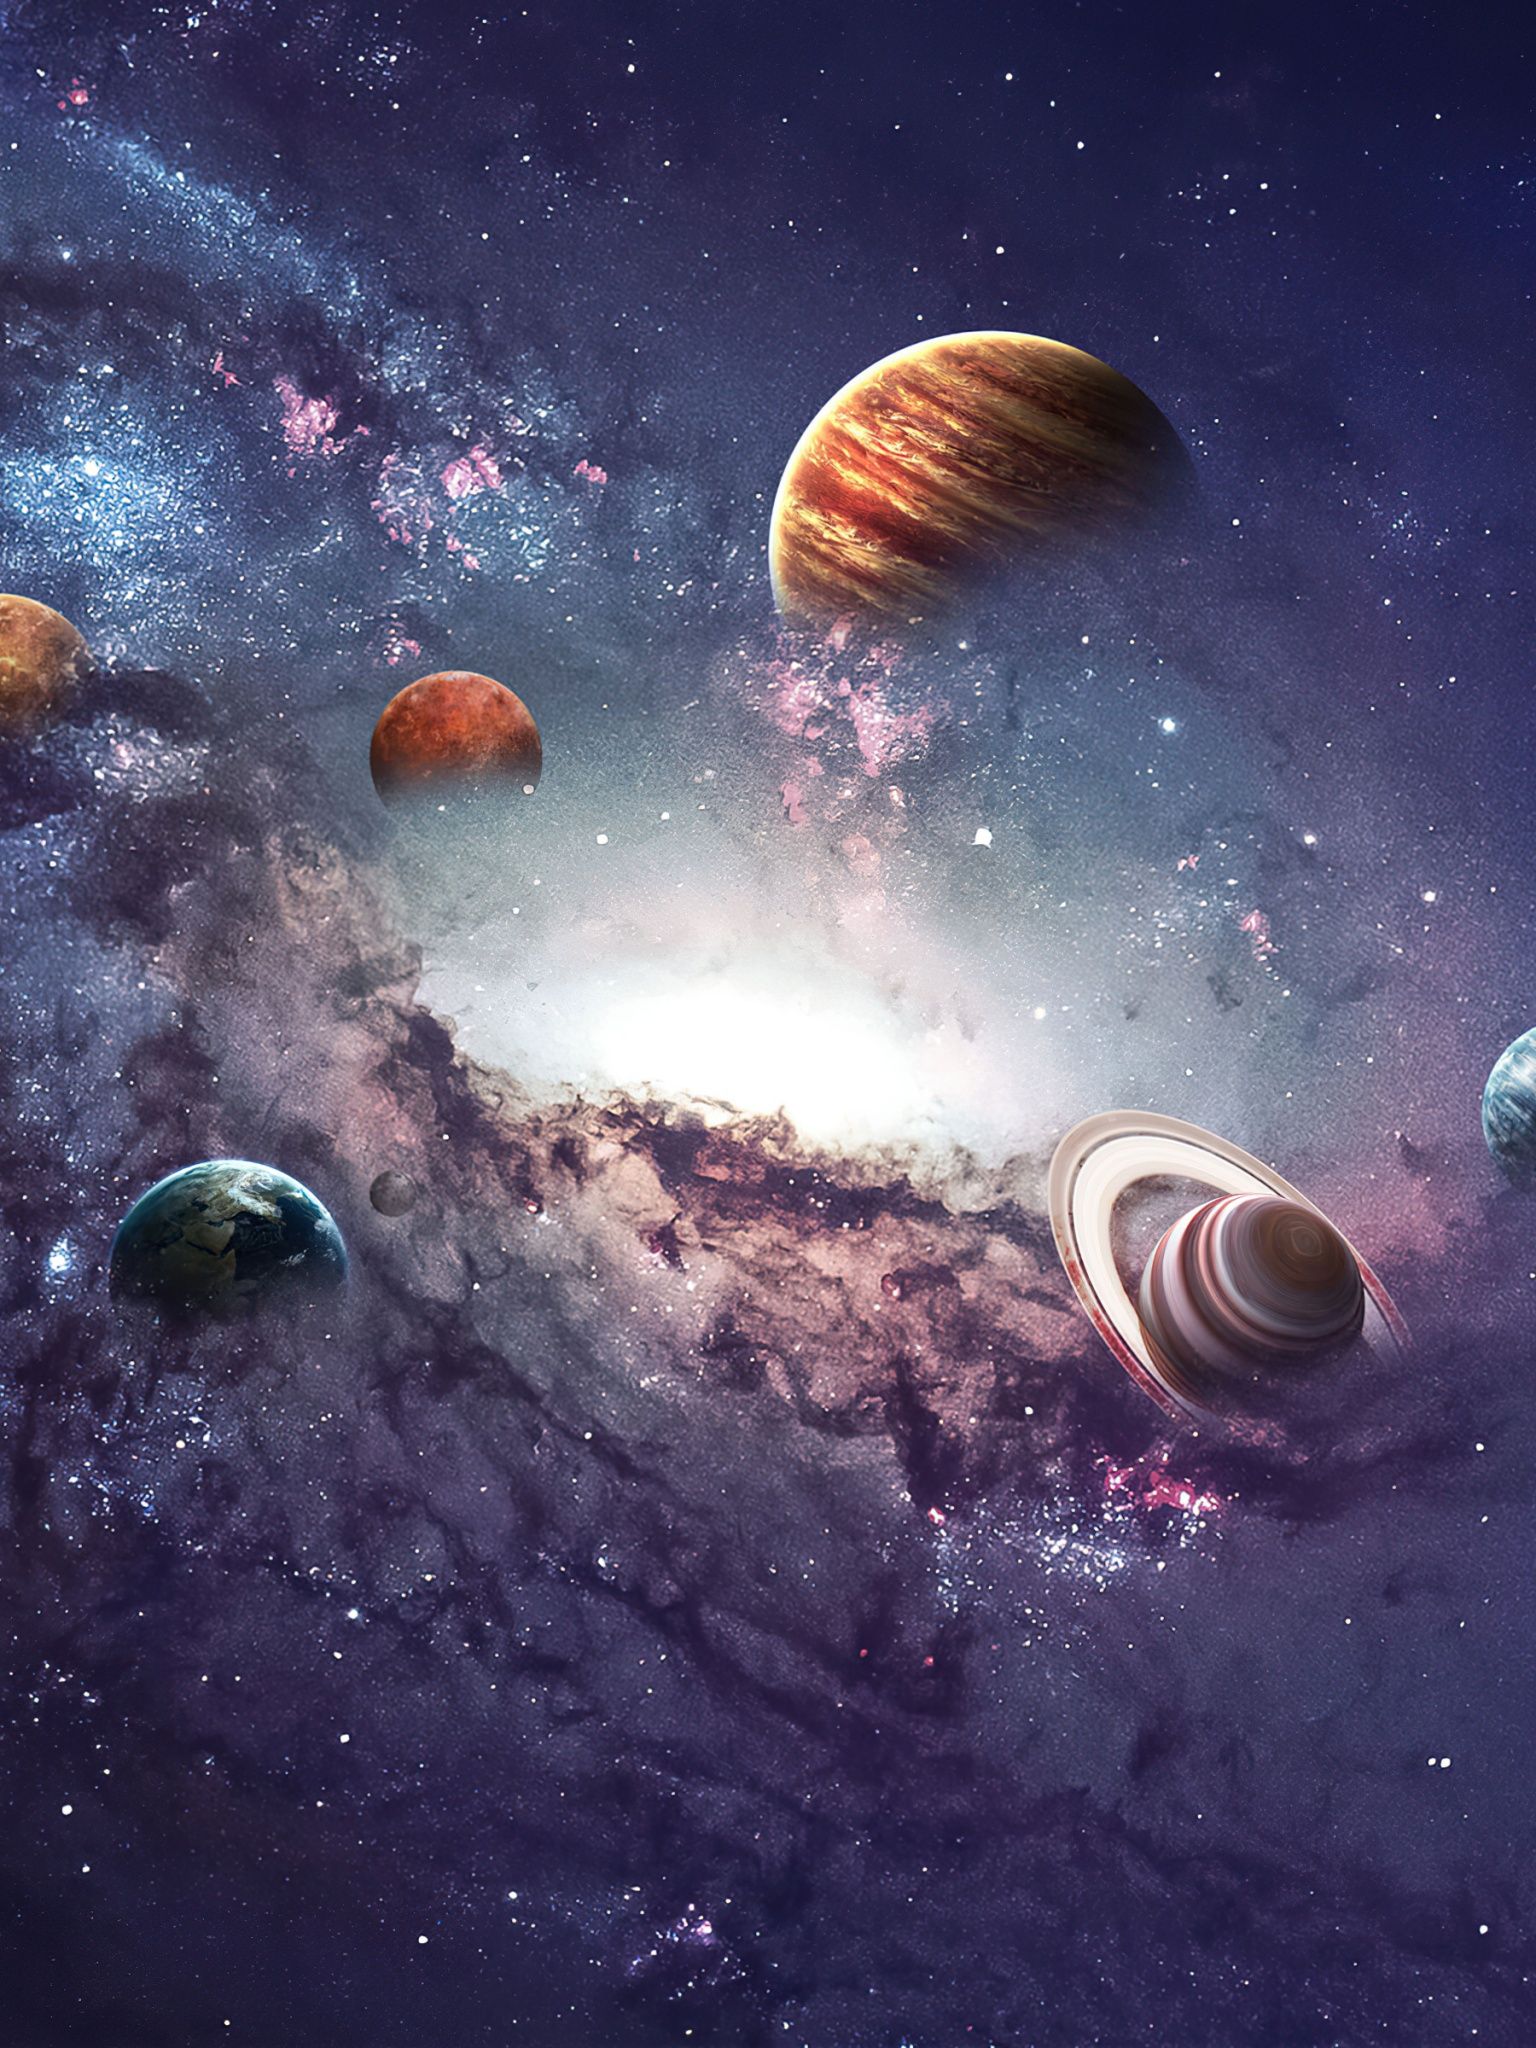 Aesthetic Space Wallpapers - 4k, HD Aesthetic Space Backgrounds on ...